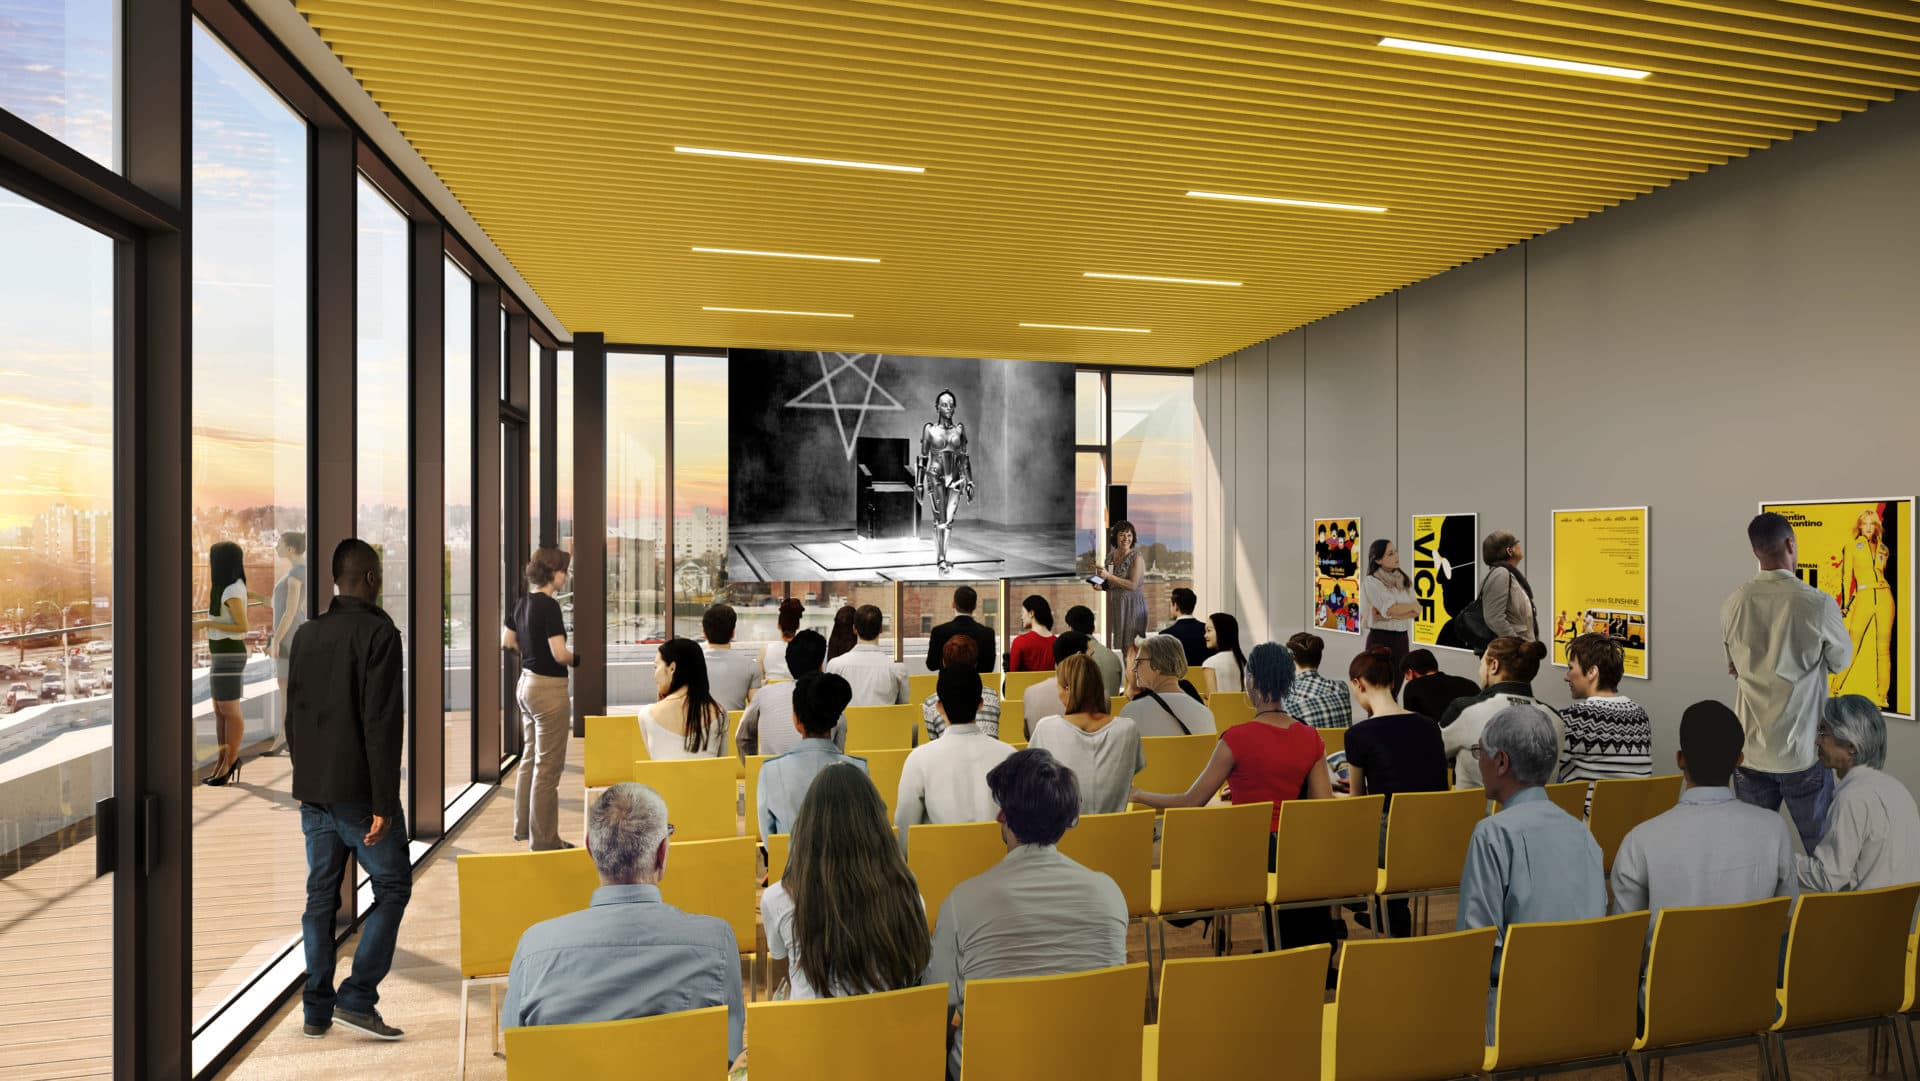 A rendering of a community room at Coolidge Corner Theatre. (Courtesy Höweler + Yoon Architecture, LLP)